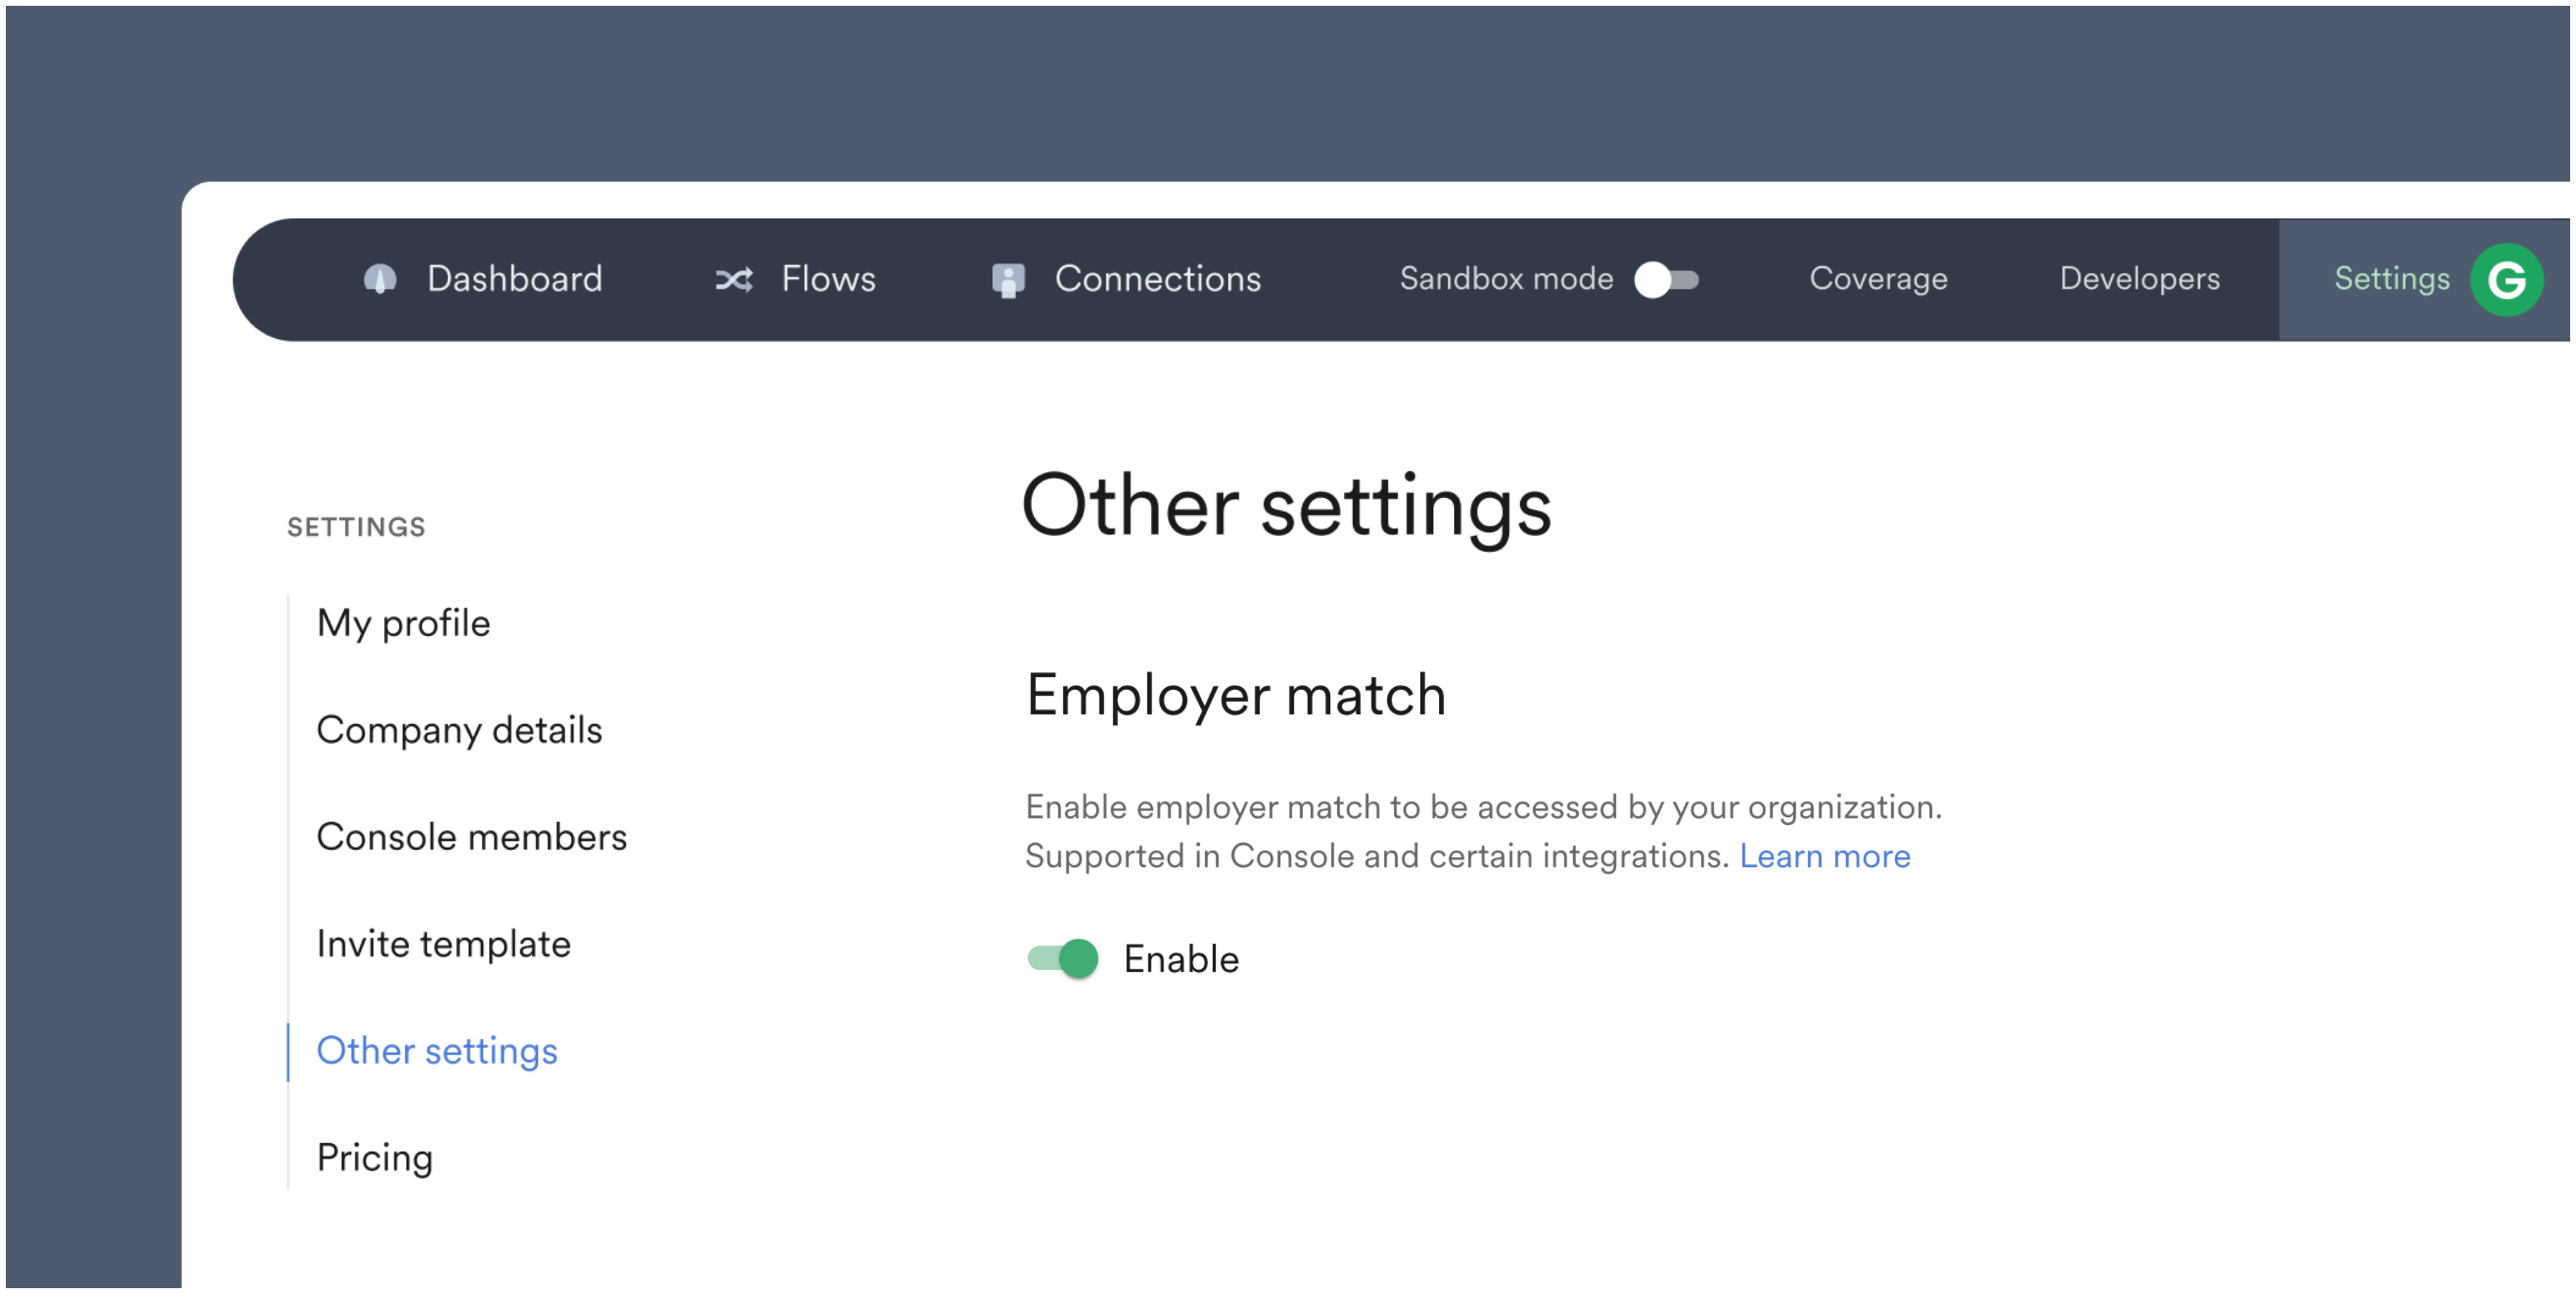 Employer match can be enabled in the Other settings section of Console.